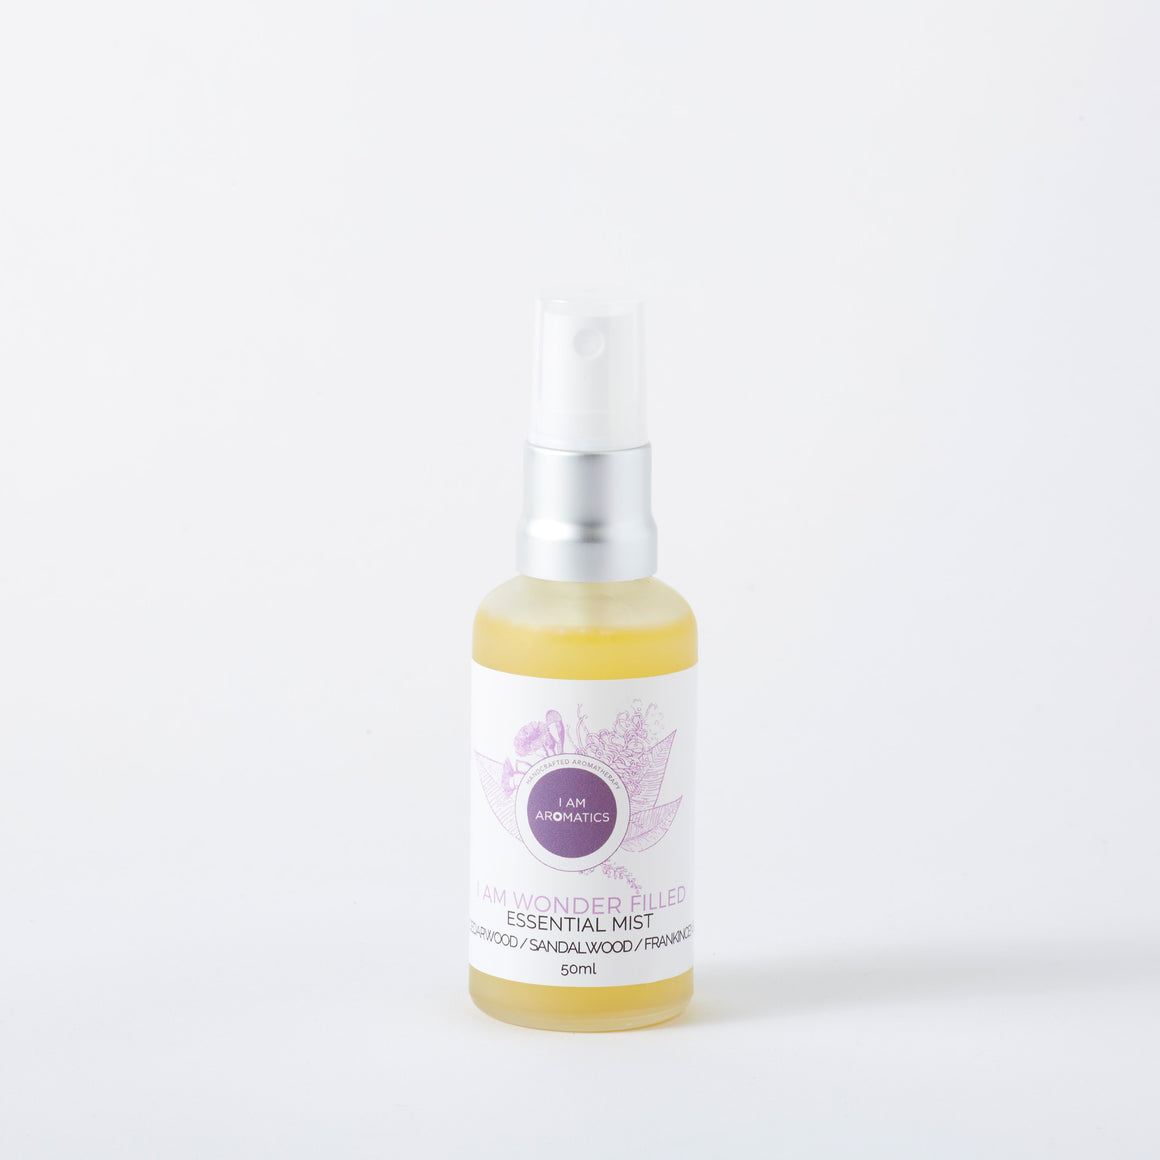 Wonderfilled essential mist, yellowish liquid in frosted 50ml glass bottle with matt silver atomiser, white label with purple botanical logo and font